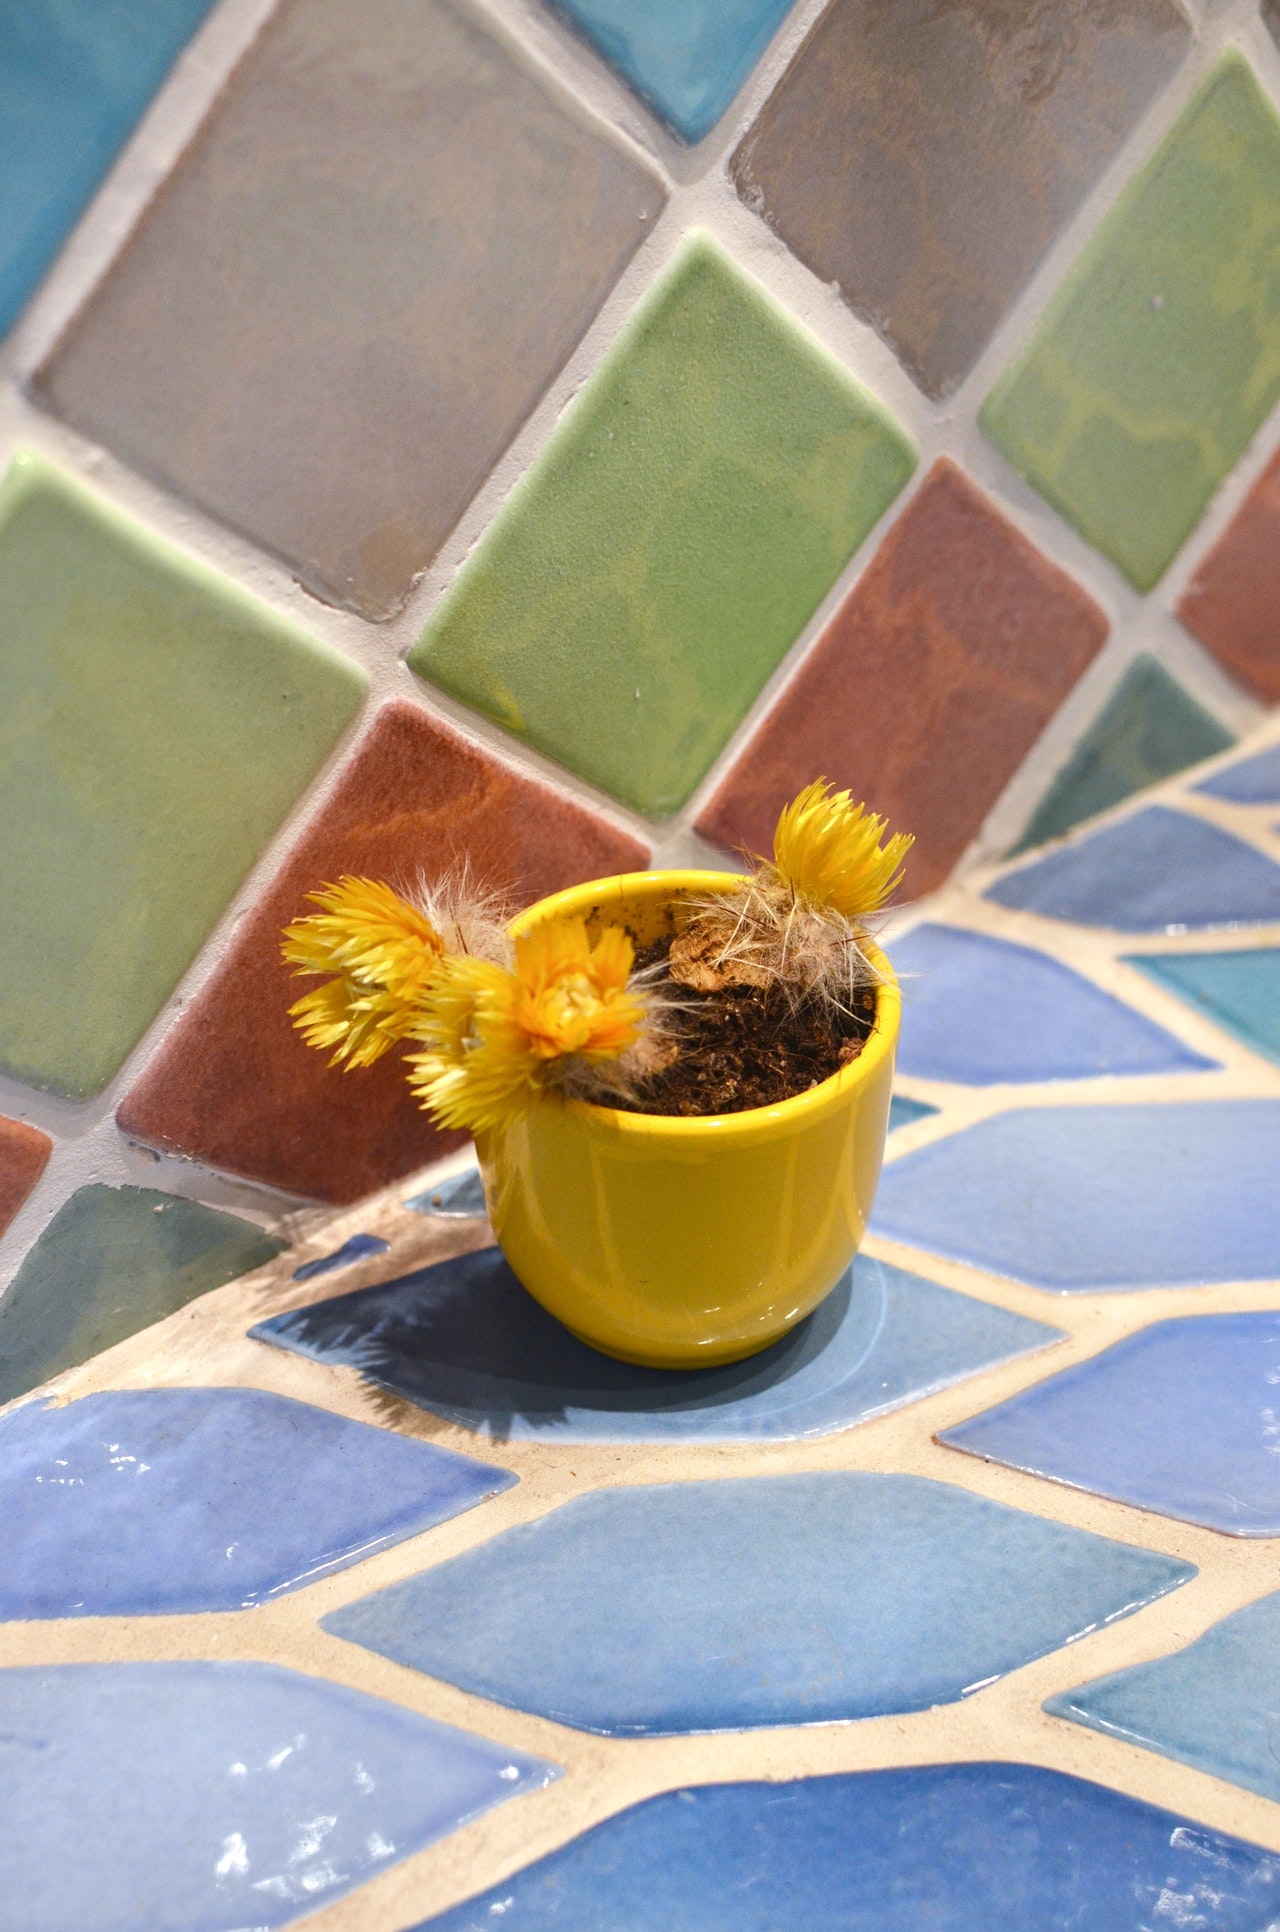 A cactus in a pot placed on plastic outdoor tiles